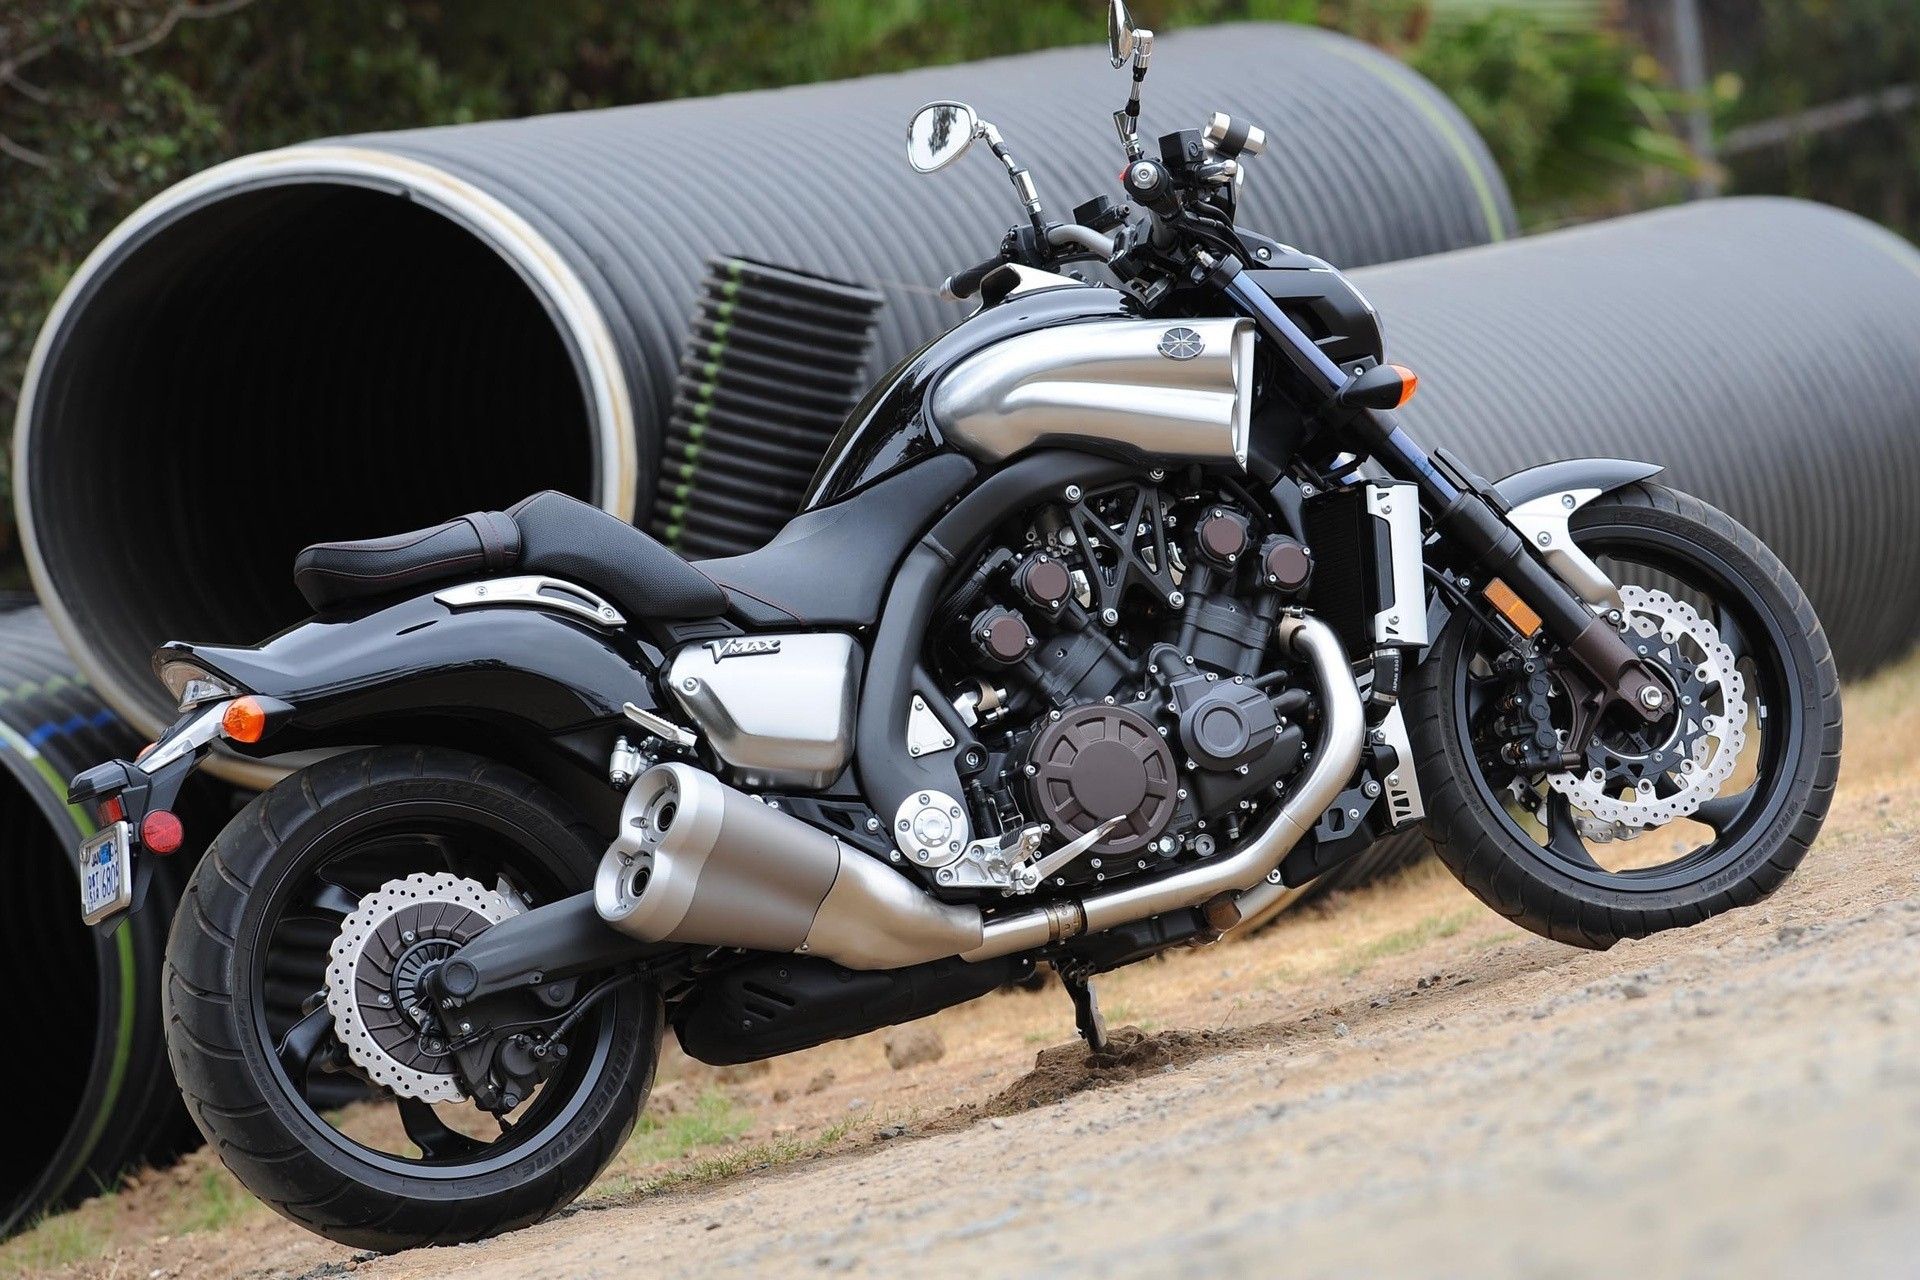 bike tailpipe of the tube ghost rider 2 power power vmax motik ...